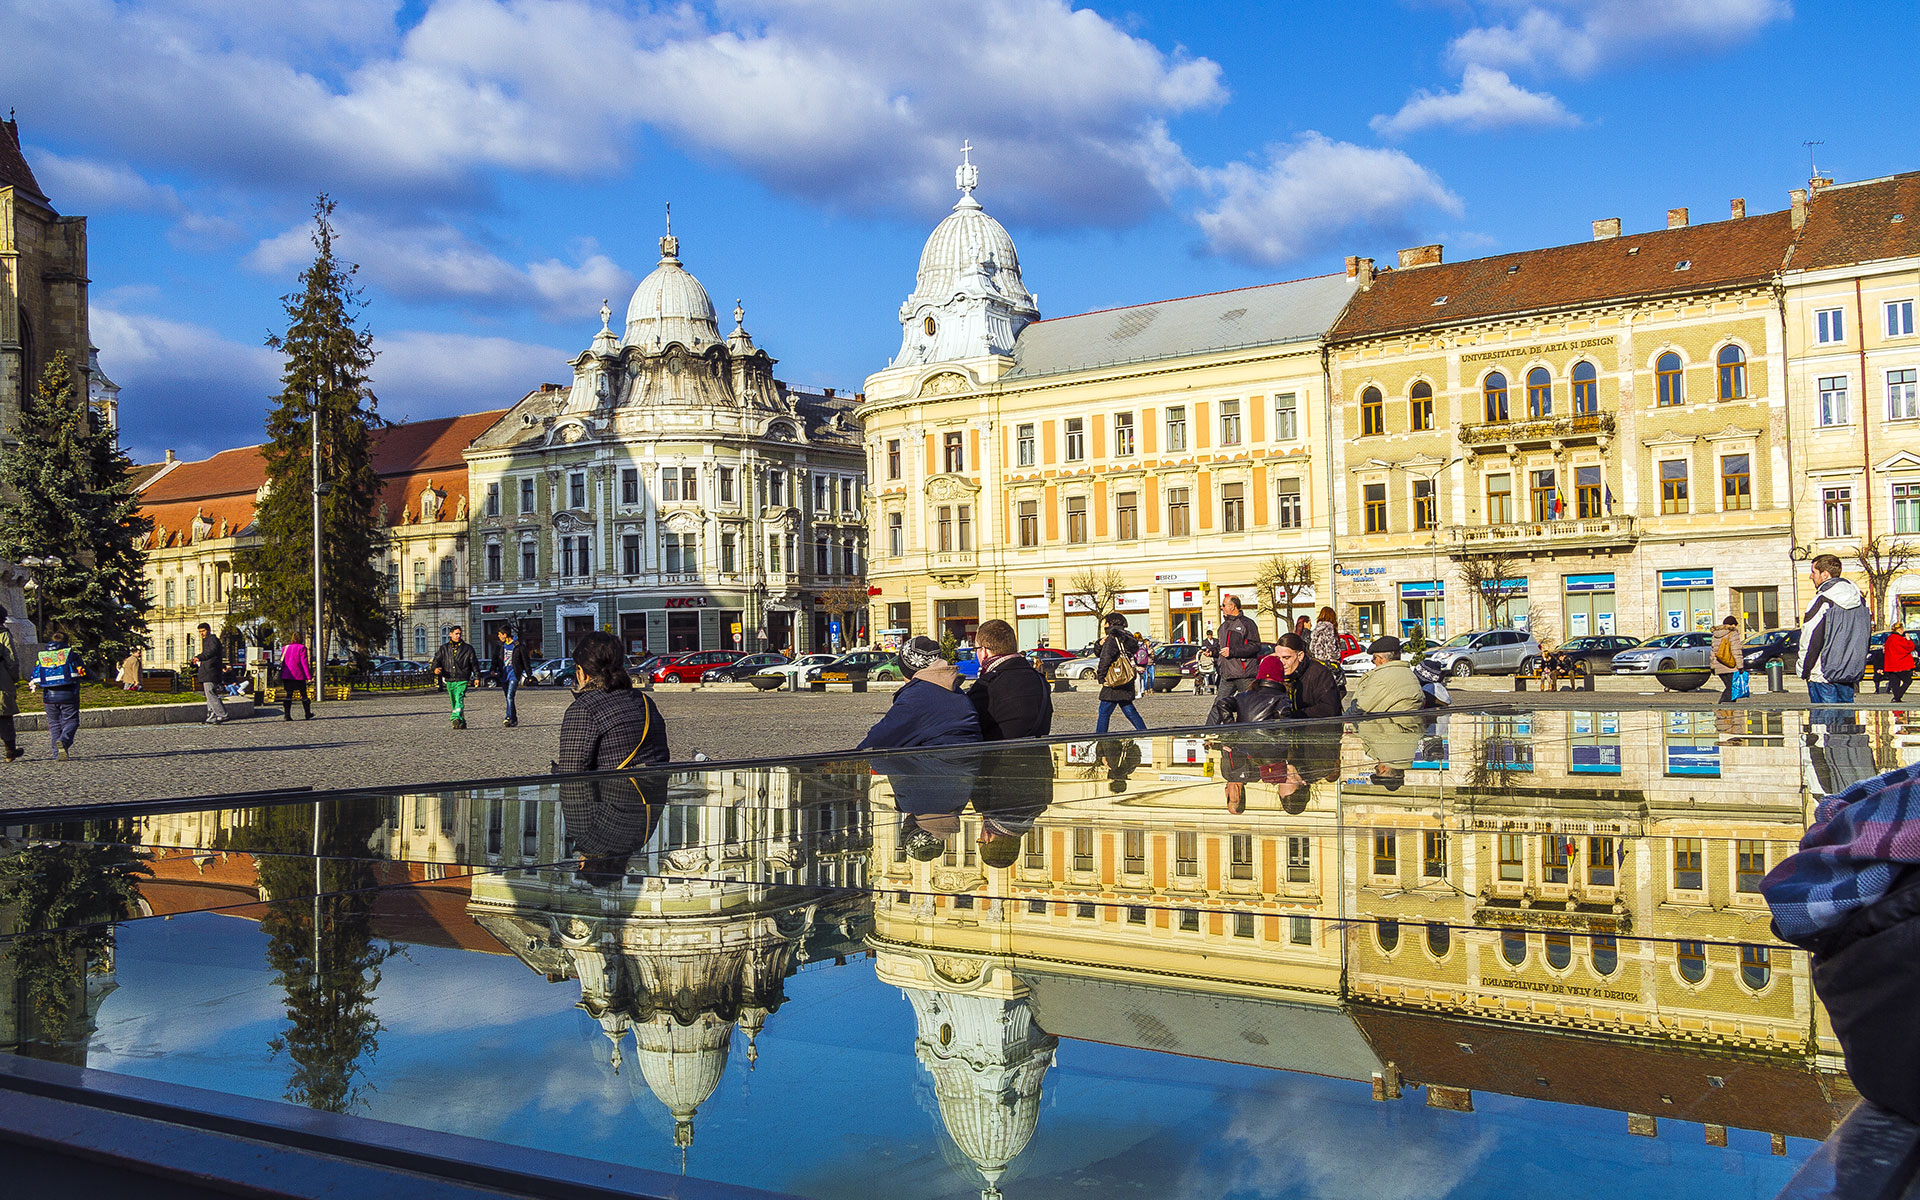 Cluj-Napoca, pictured above, gets a direct daytime train from Vienna from December 2018 (photo © Abdelmoumen Taoutaou / dreamstime.com).